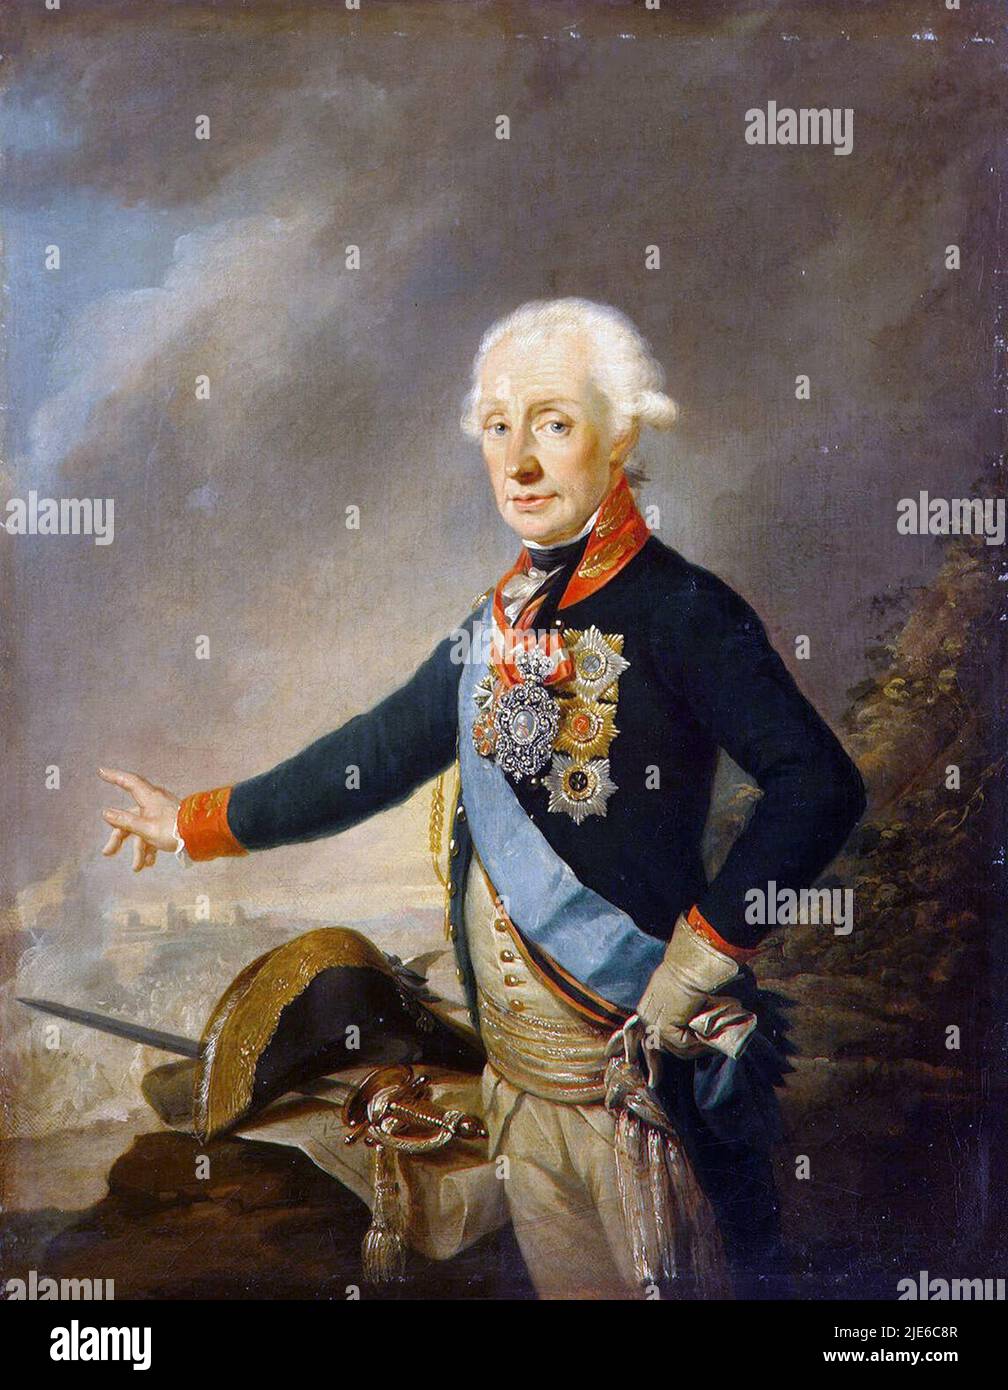 The Russian general Alexander Suvorov painted by Joseph Kreutzinger Stock Photo